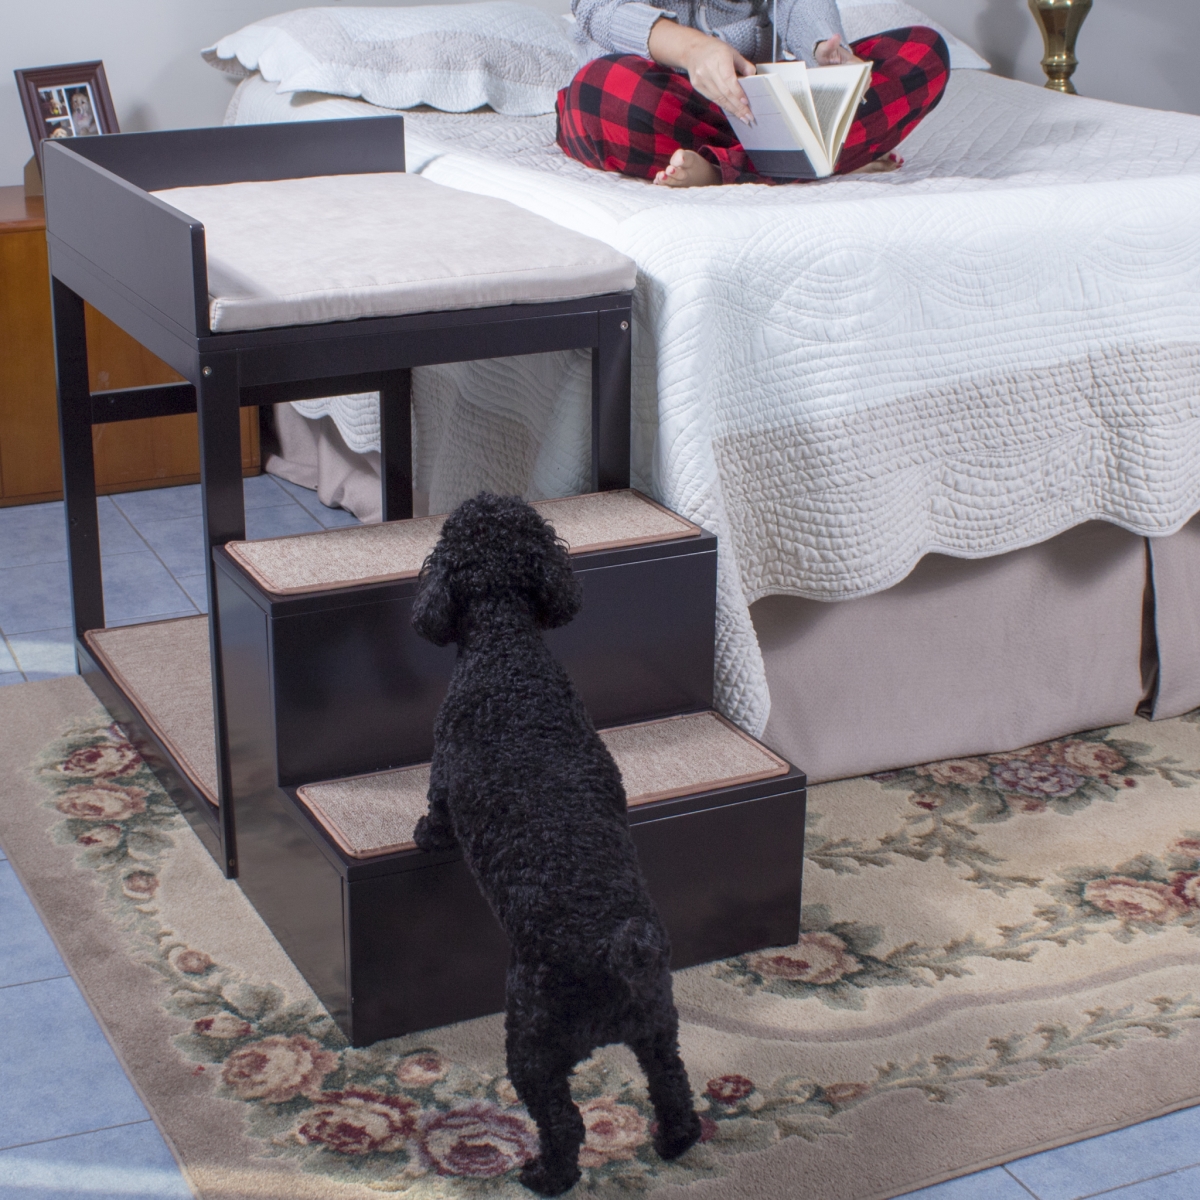 Dogf60 Buddy Bunk Multi-level Bed & Step System For Dogs Cats, Brown